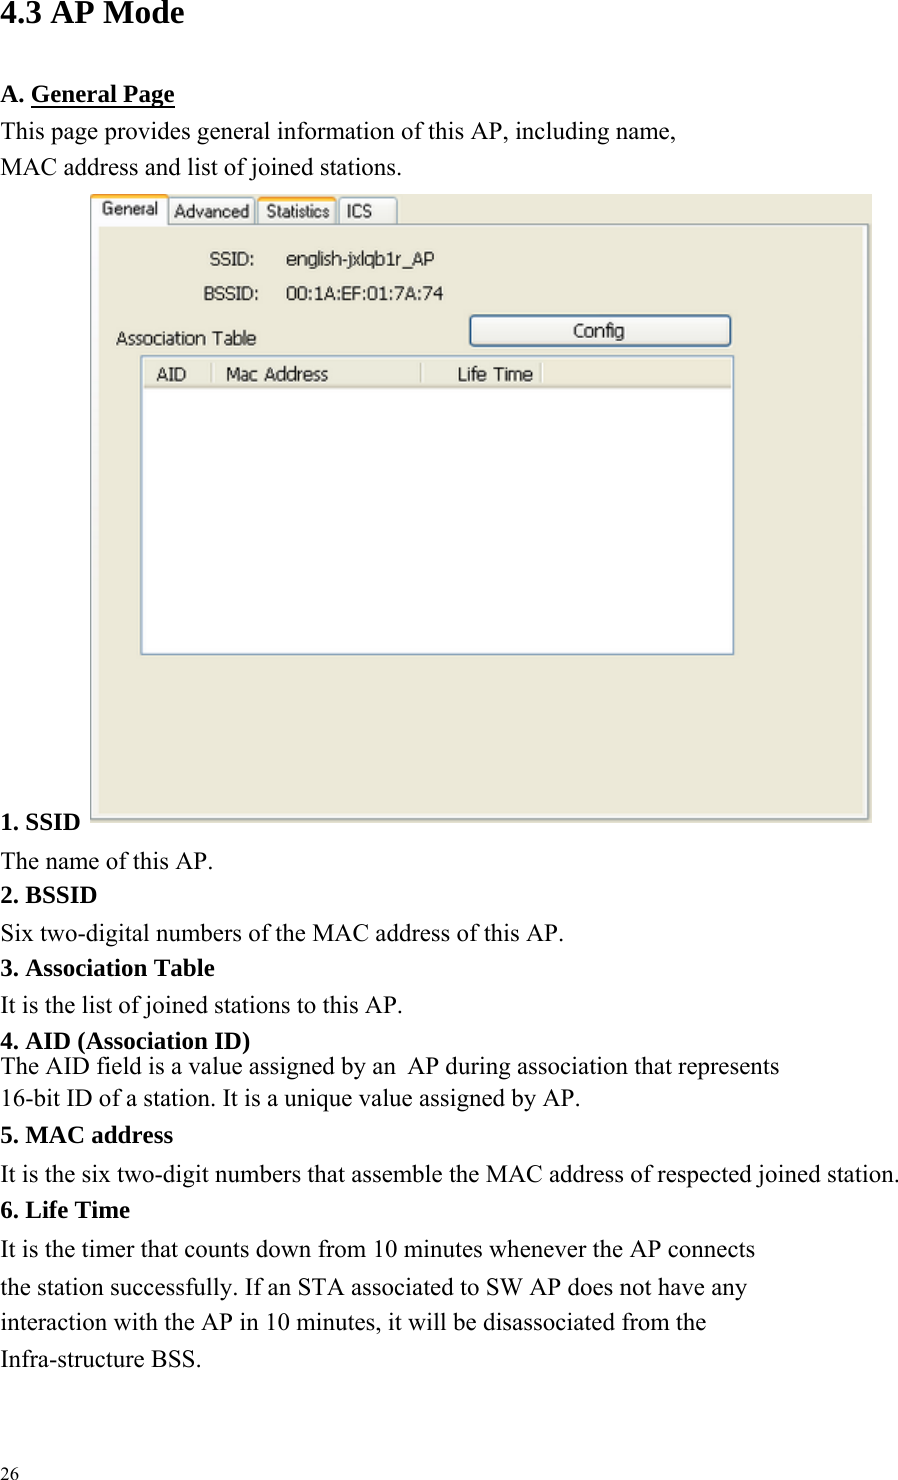  4.3 AP Mode   A. General PageThis page provides general information of this AP, including name, MAC address and list of joined stations.                                 1. SSID The name of this AP.     2. BSSID Six two-digital numbers of the MAC address of this AP.     3. Association Table It is the list of joined stations to this AP.     4. AID (Association ID) The AID field is a value assigned by an  AP during association that represents   16-bit ID of a station. It is a unique value assigned by AP.     5. MAC address It is the six two-digit numbers that assemble the MAC address of respected joined station.     6. Life Time It is the timer that counts down from 10 minutes whenever the AP connects the station successfully. If an STA associated to SW AP does not have any   interaction with the AP in 10 minutes, it will be disassociated from the Infra-structure BSS.     26 